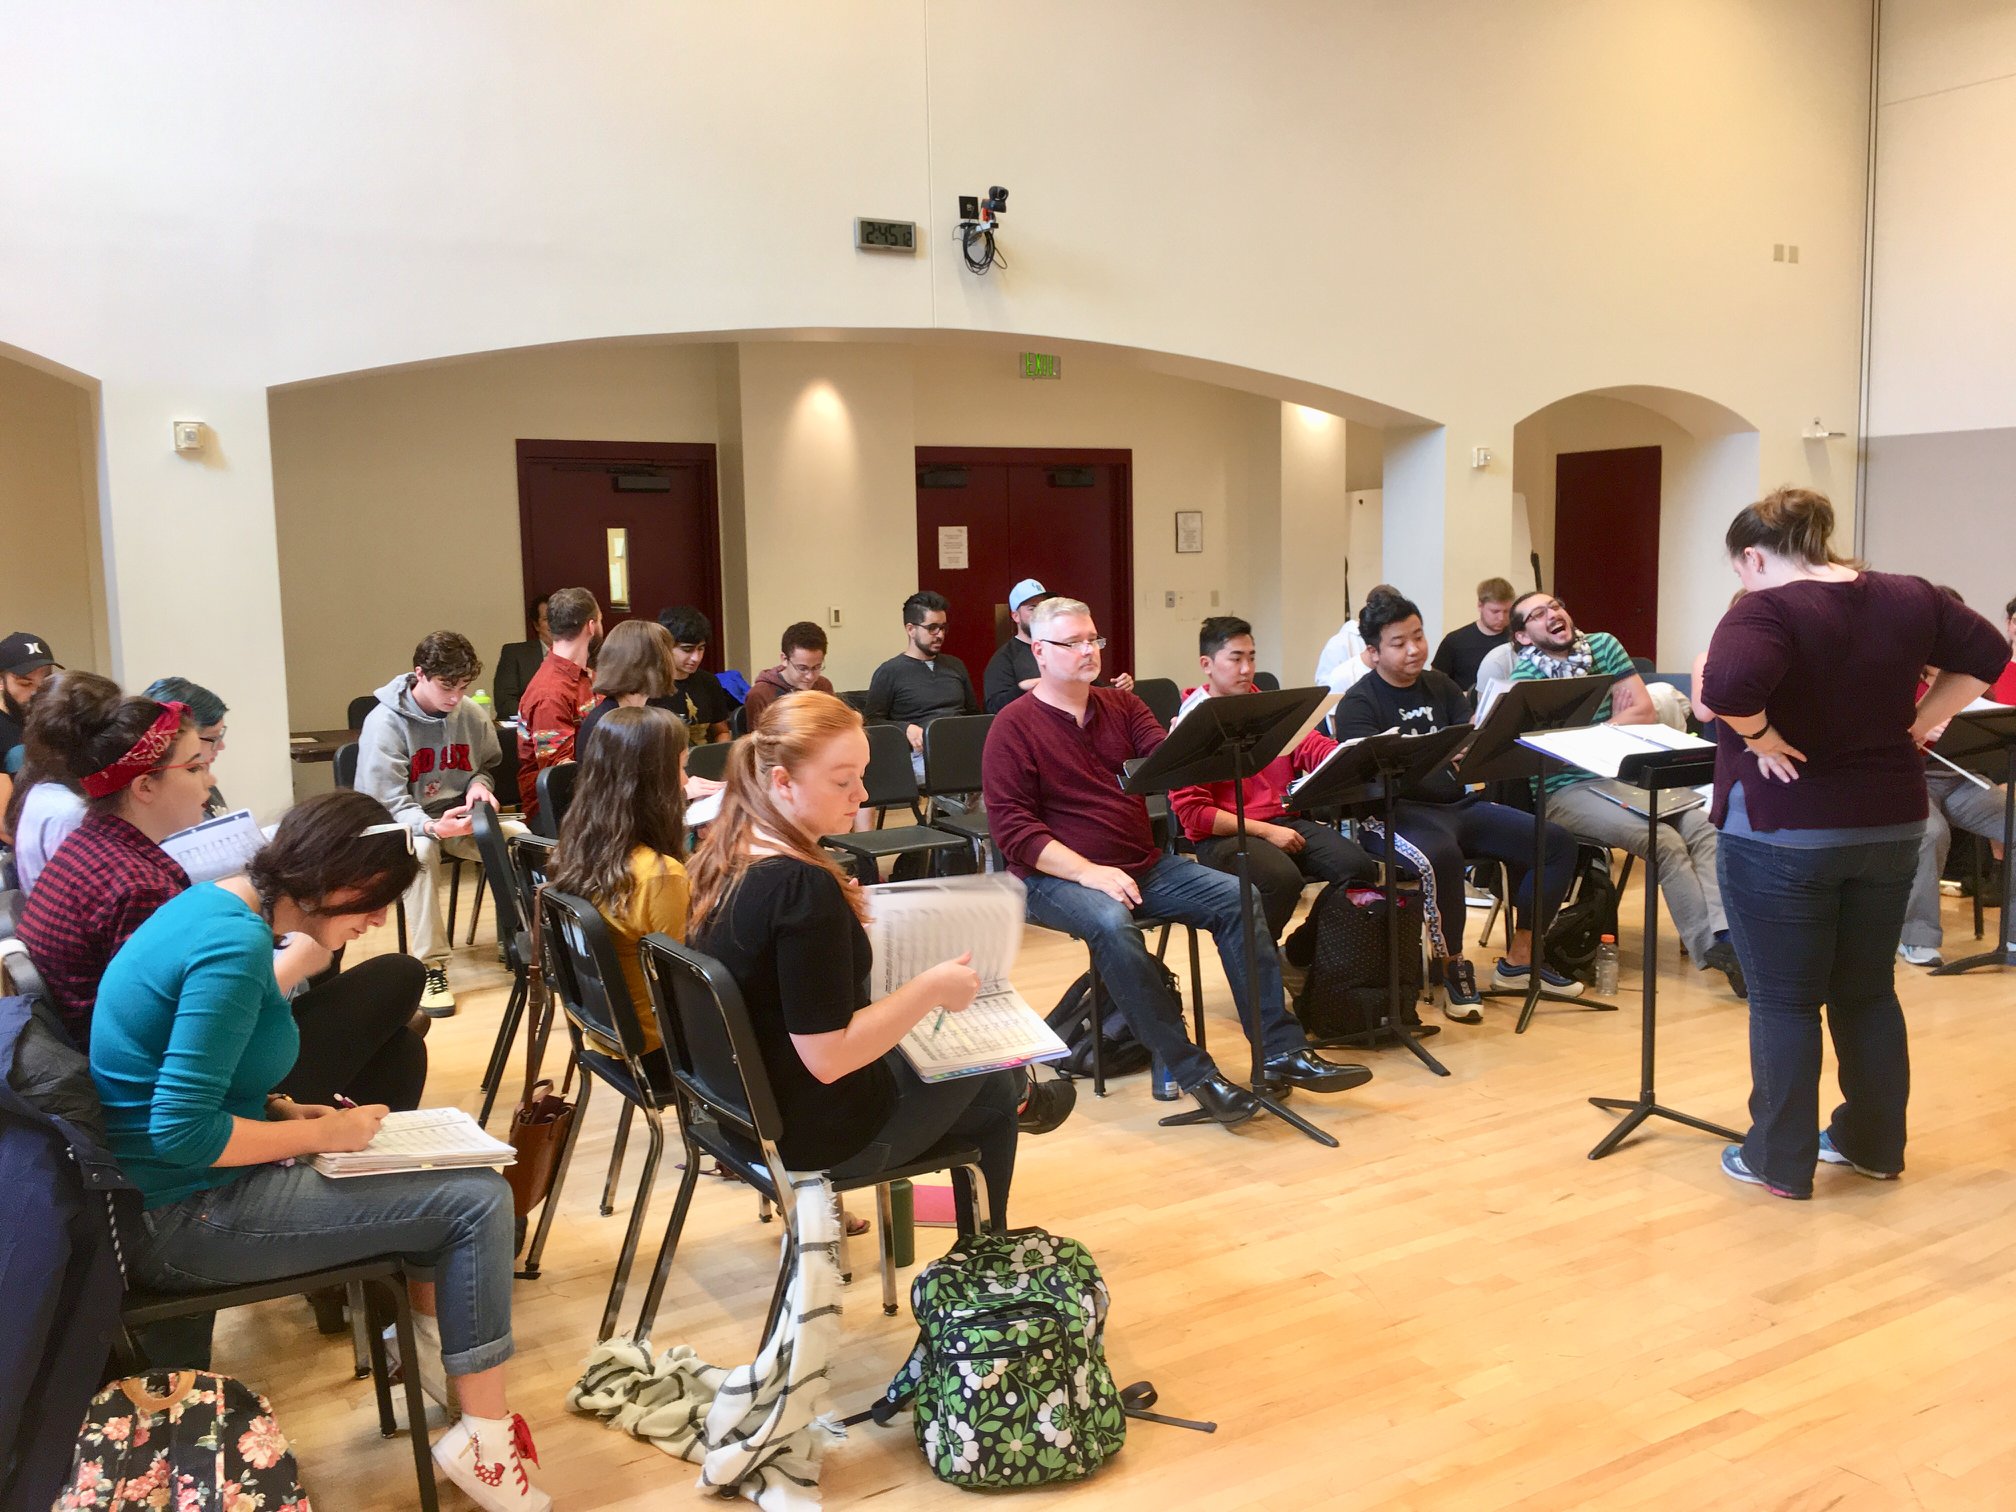 Opera students participate in rehearsals at Lamont School of Music